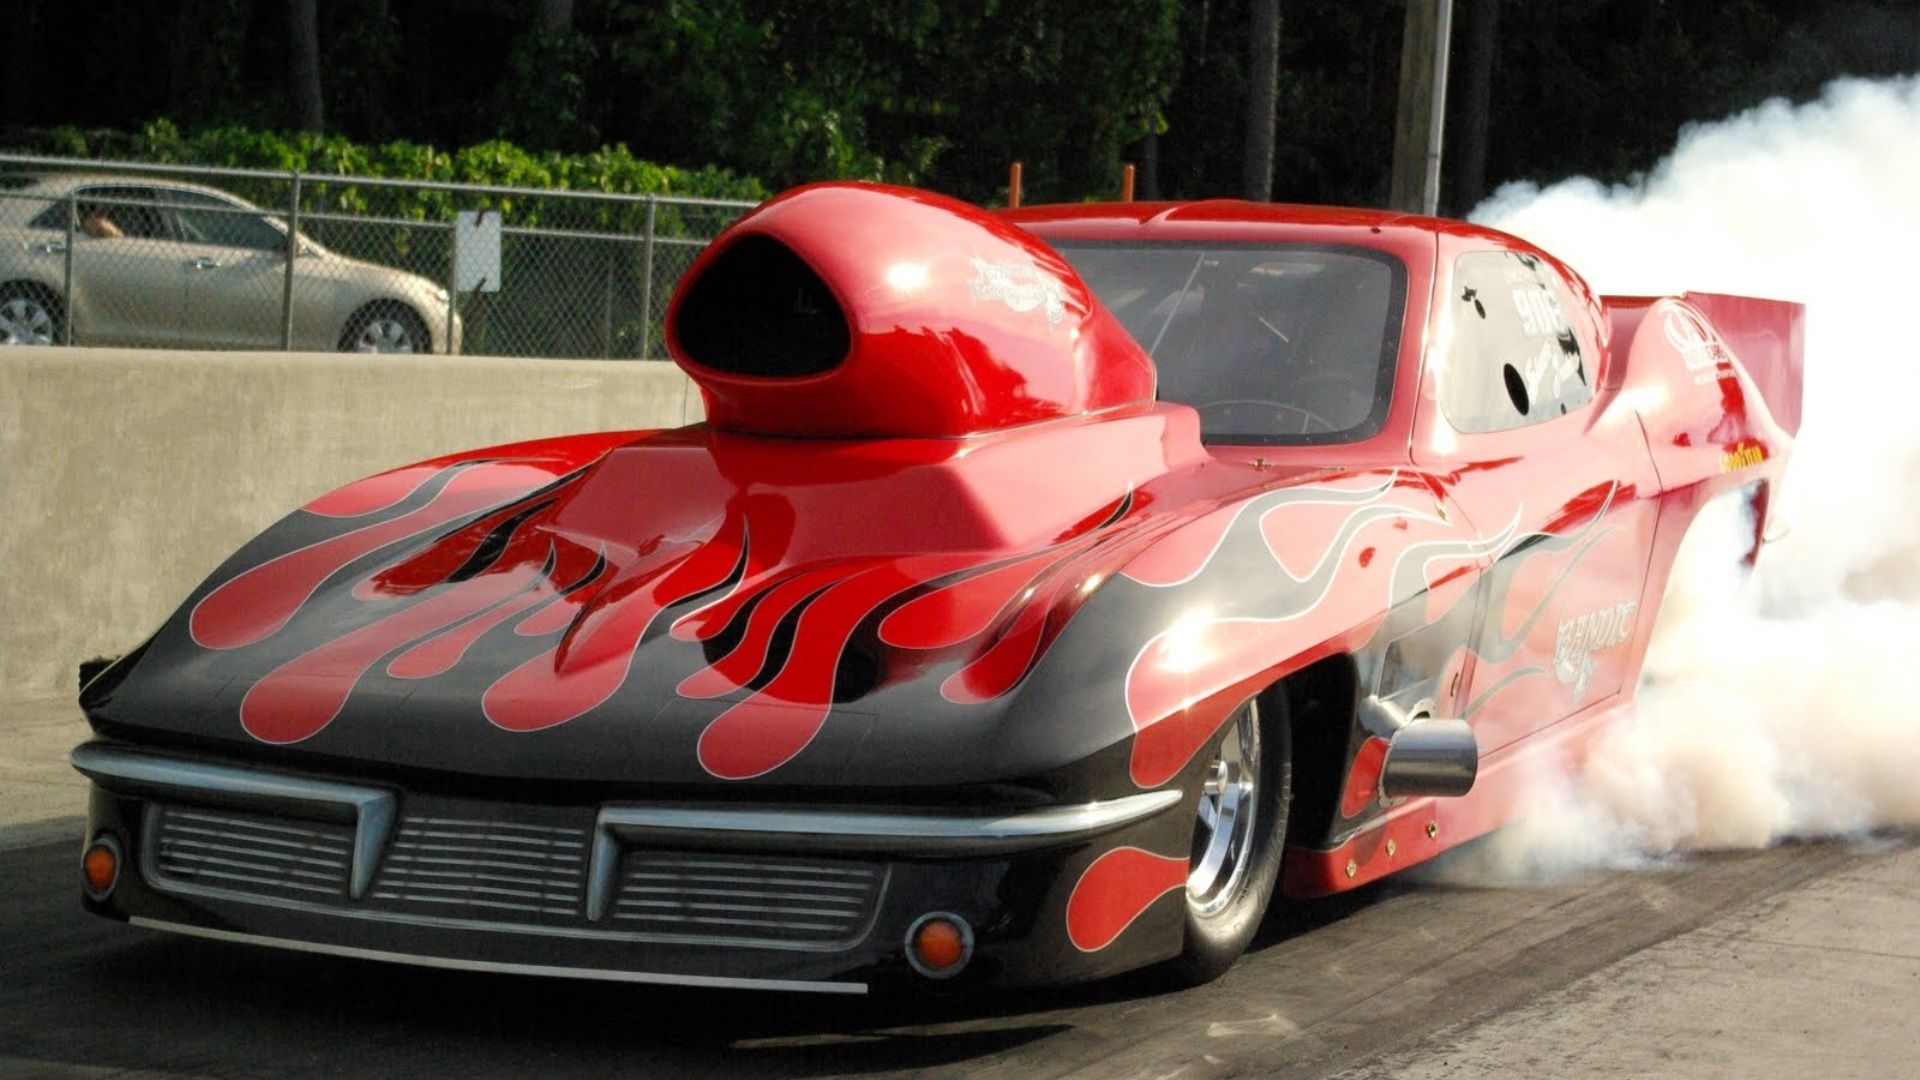 Pro Mod Dragster